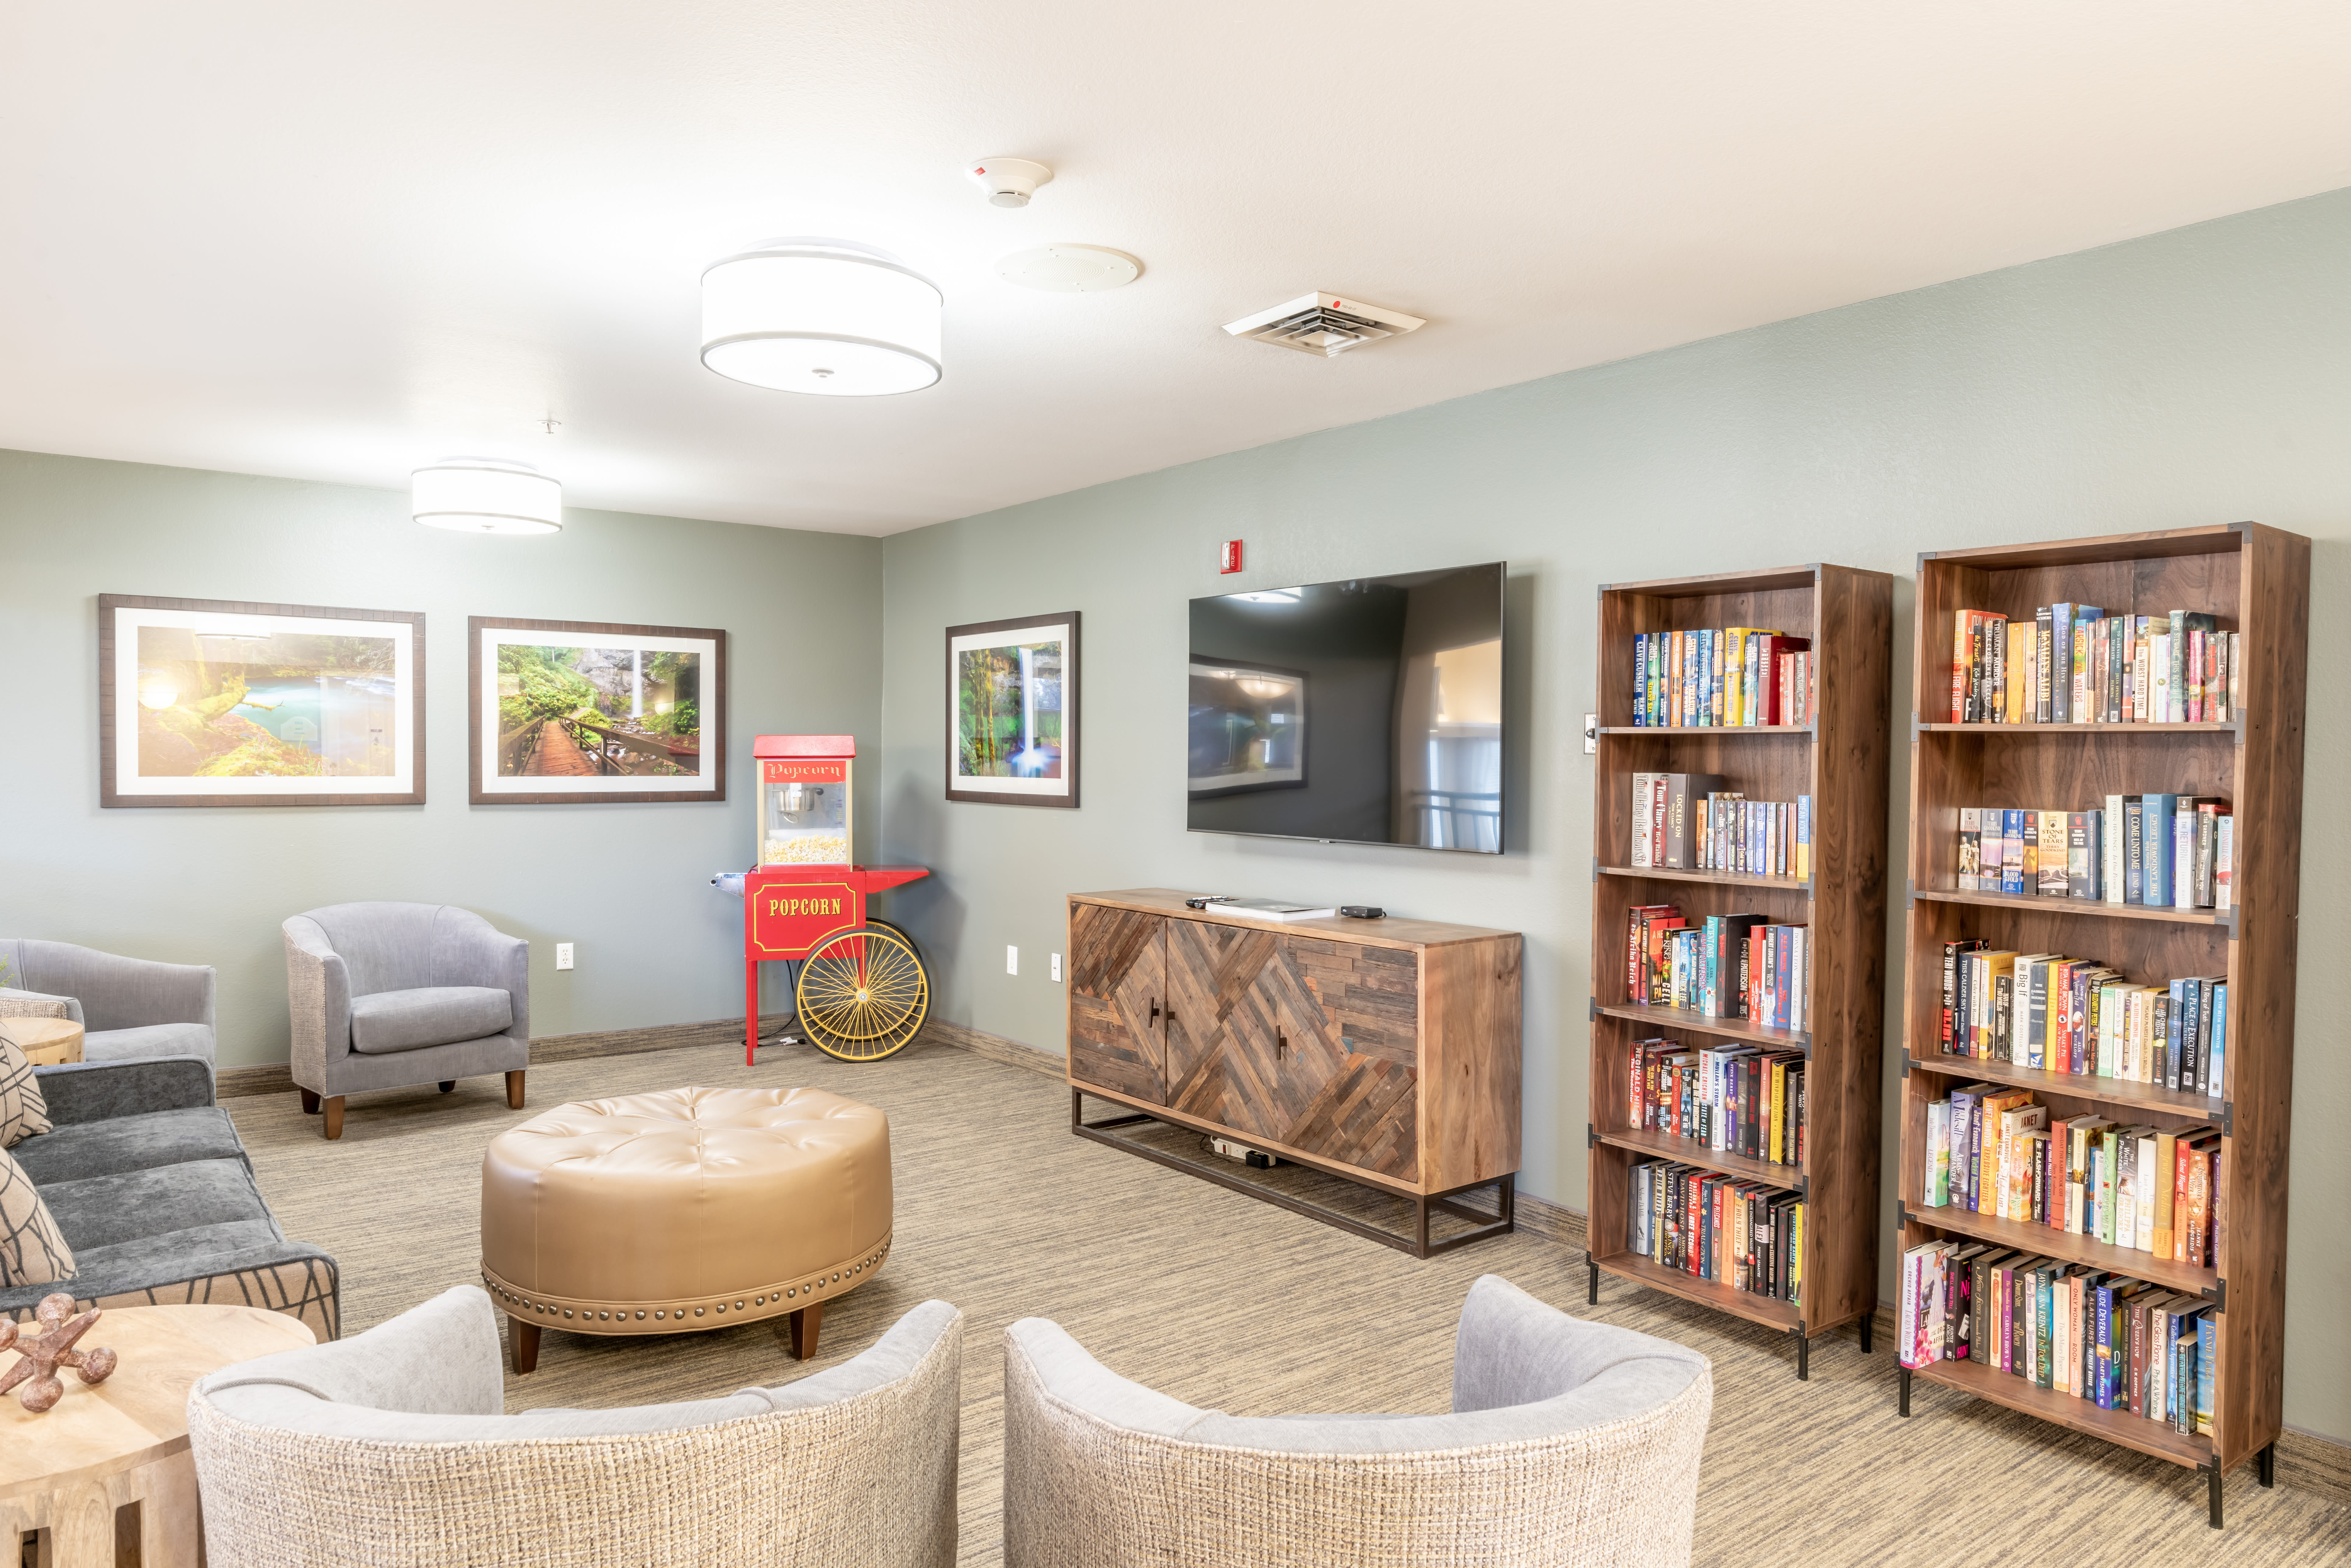 A spacious theater and library room at Heron Pointe Senior Living in Monmouth, Oregon